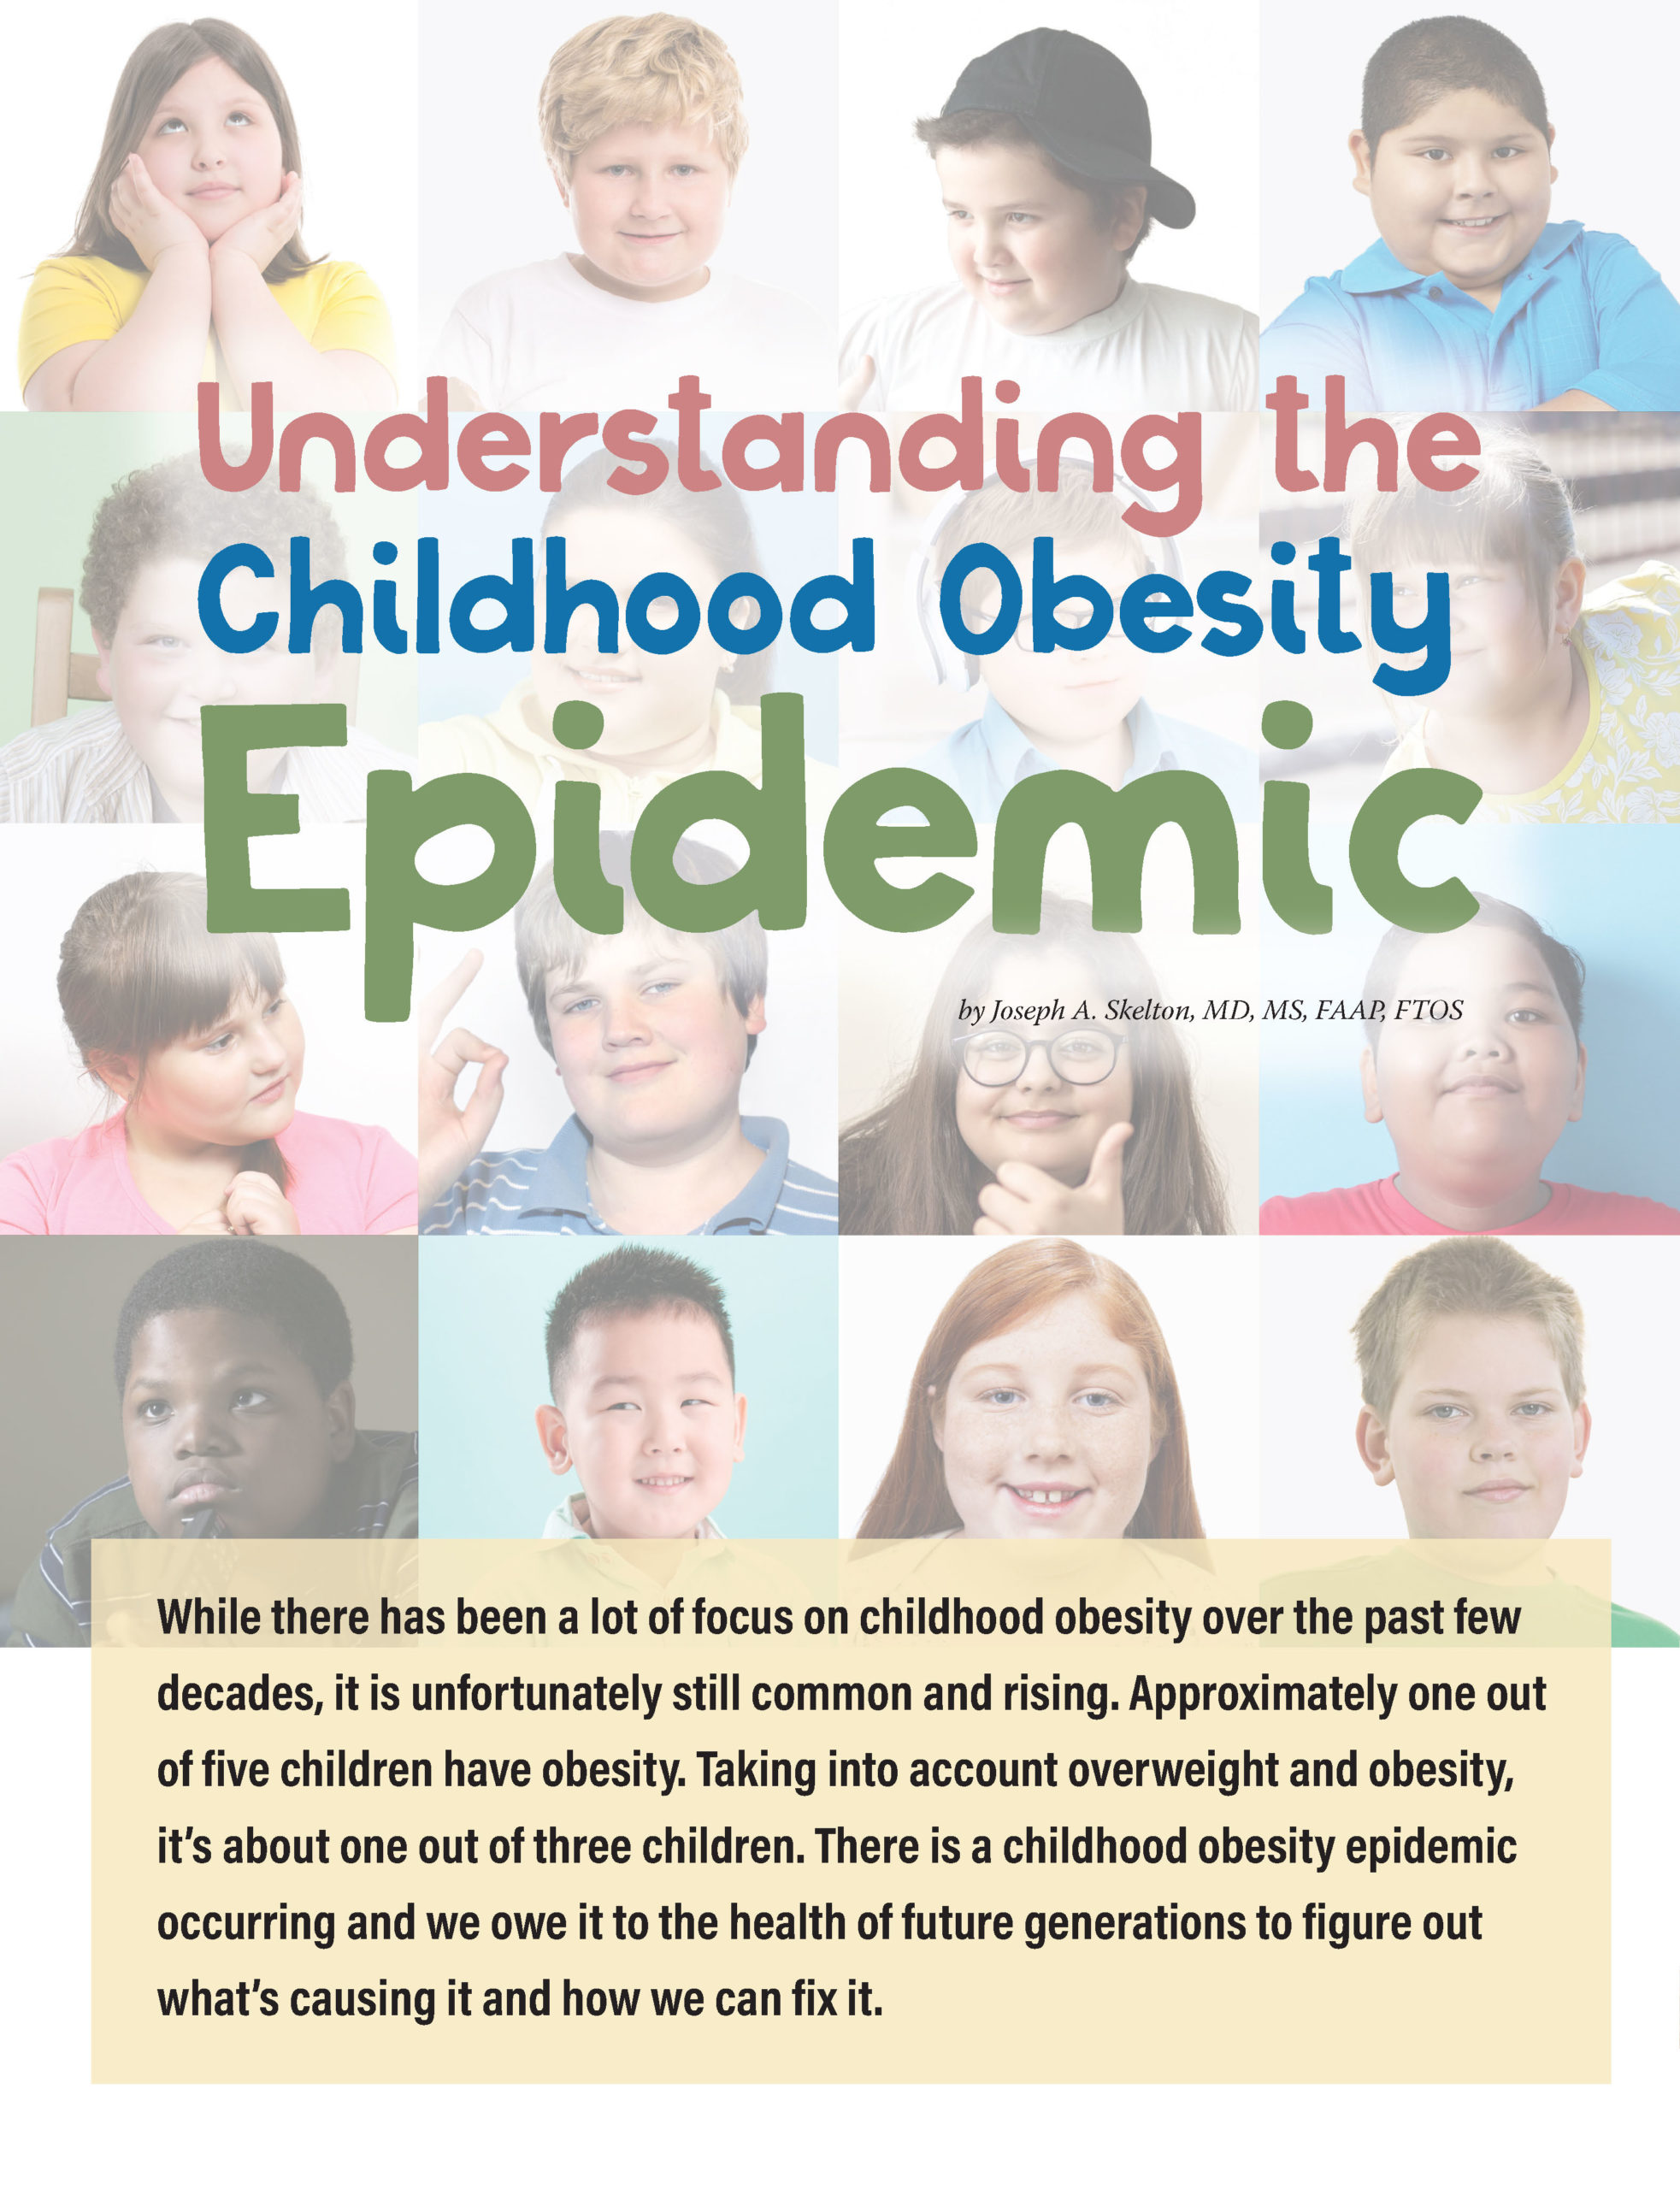 an essay about childhood obesity